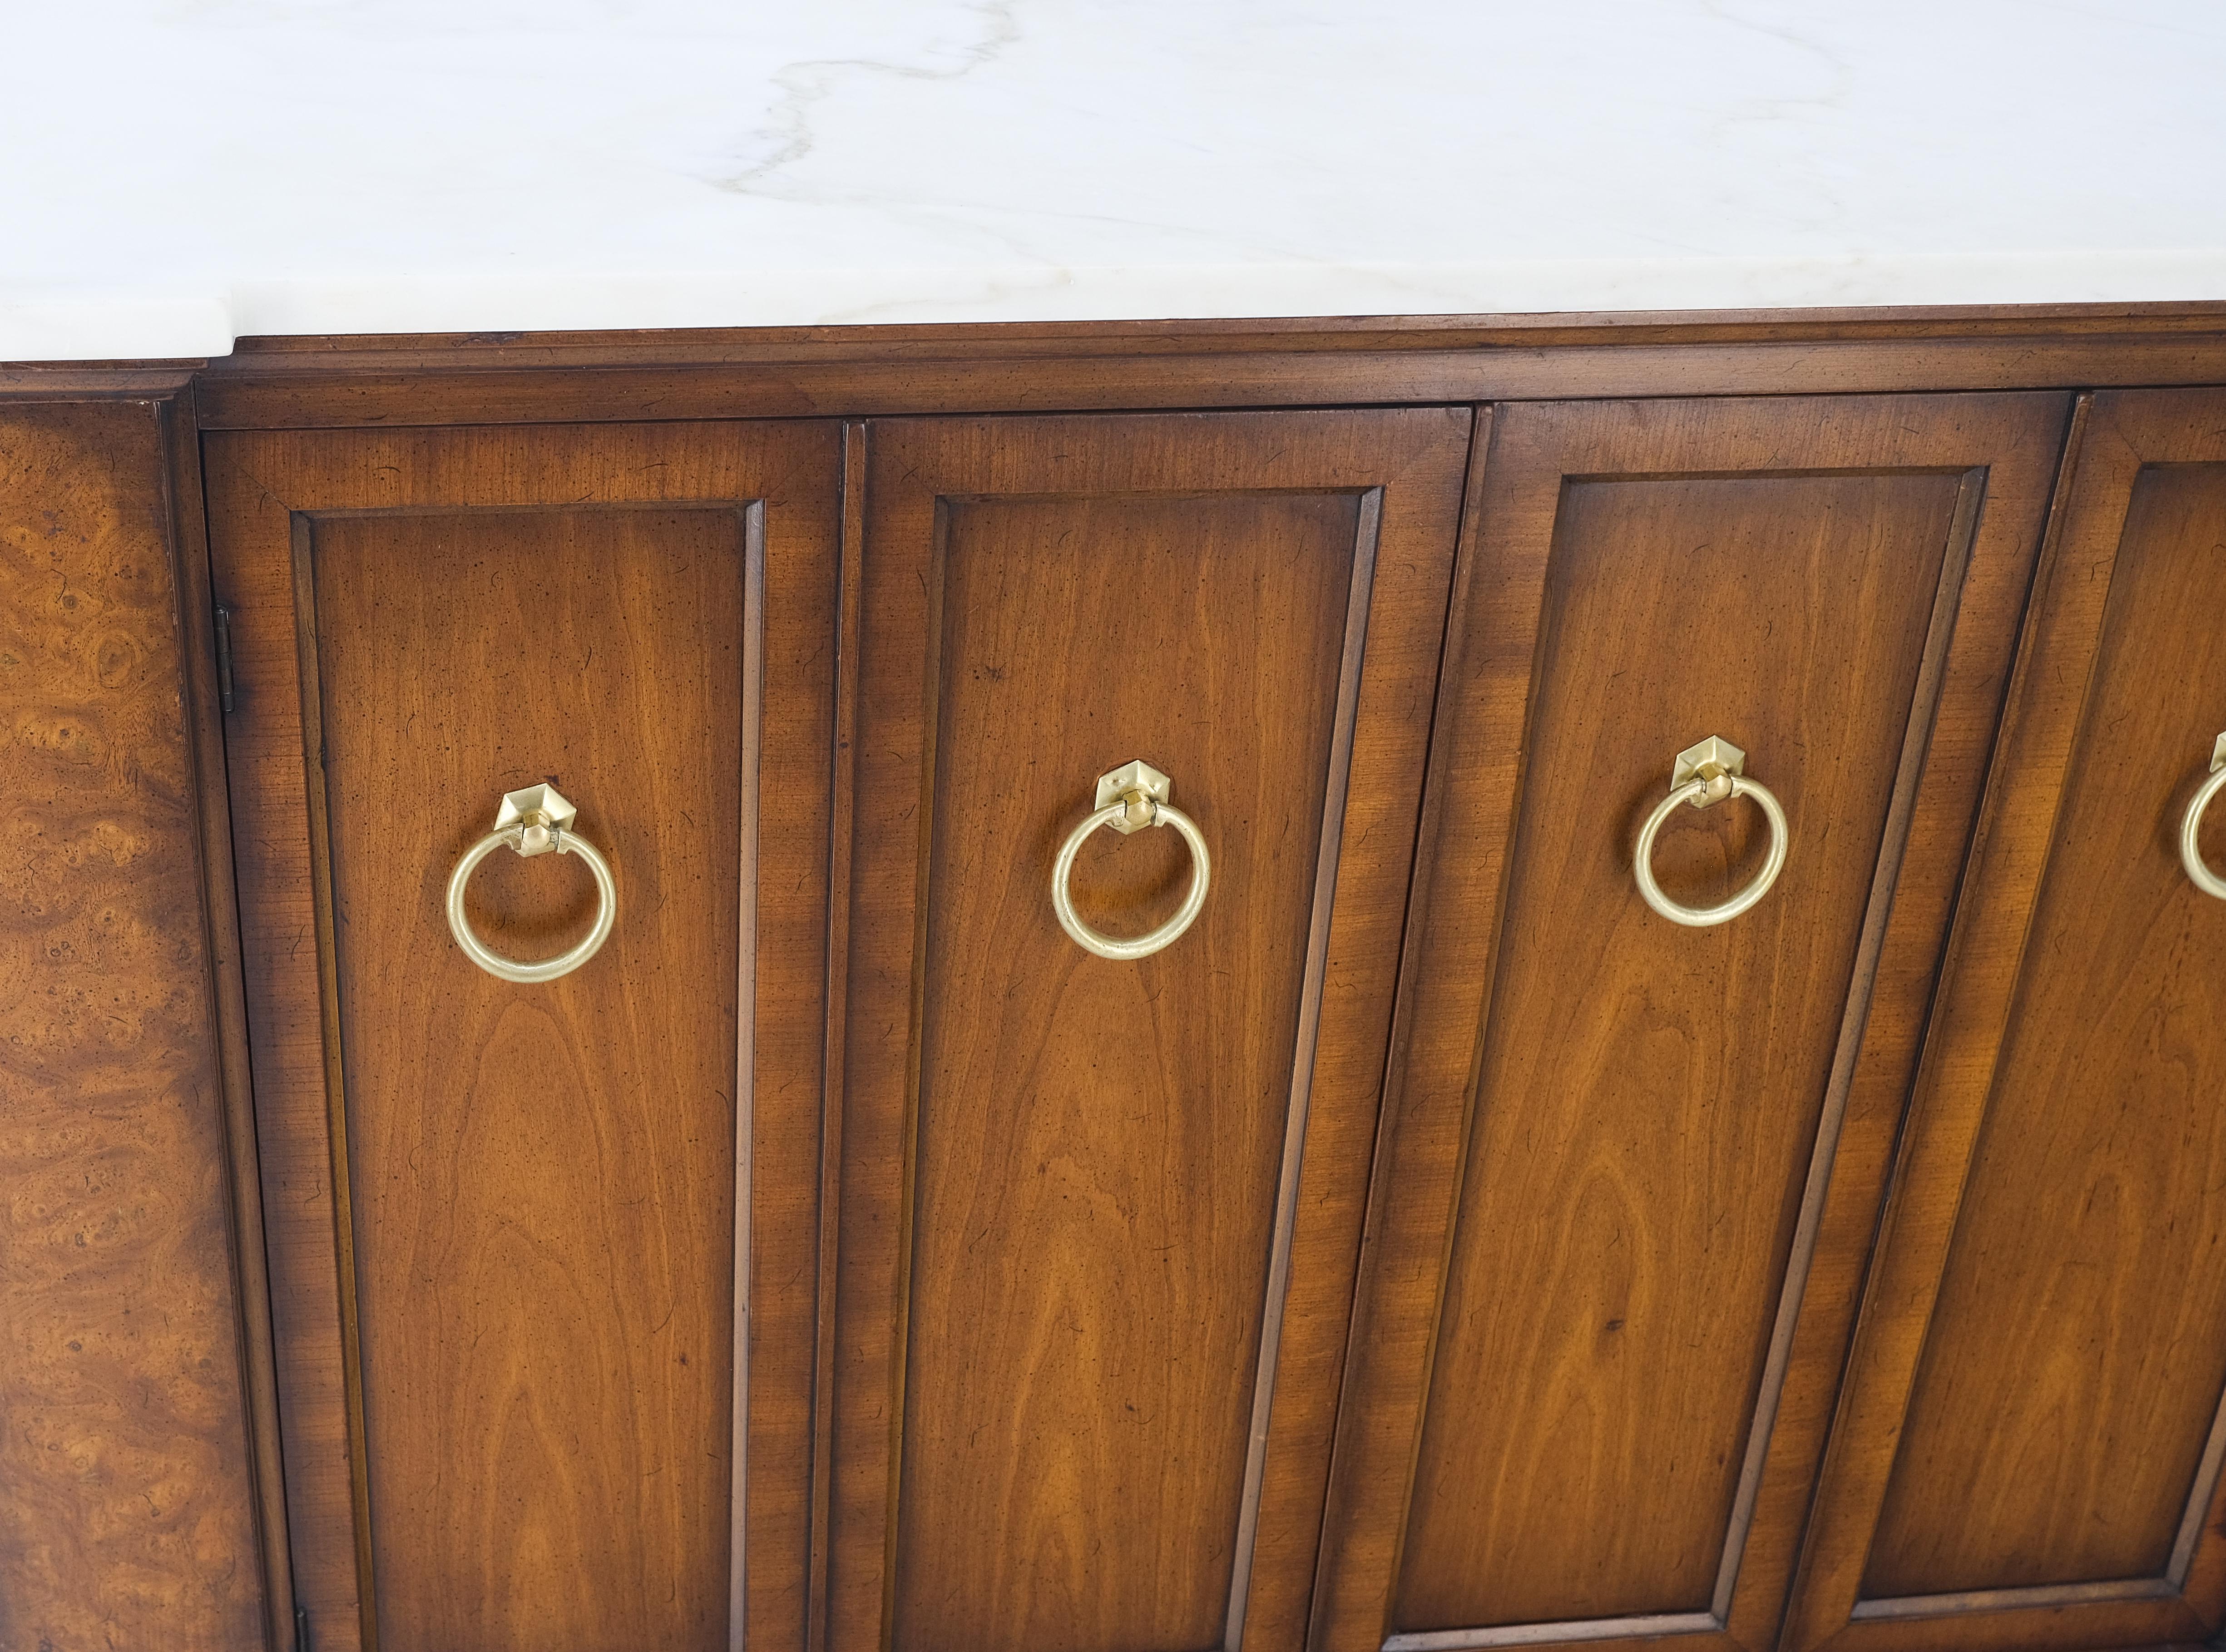 Marble Top Round Brass Ring Drop Pulls Hardware Burl Wood Double Door Compartment with Shelf Credenza MINT!